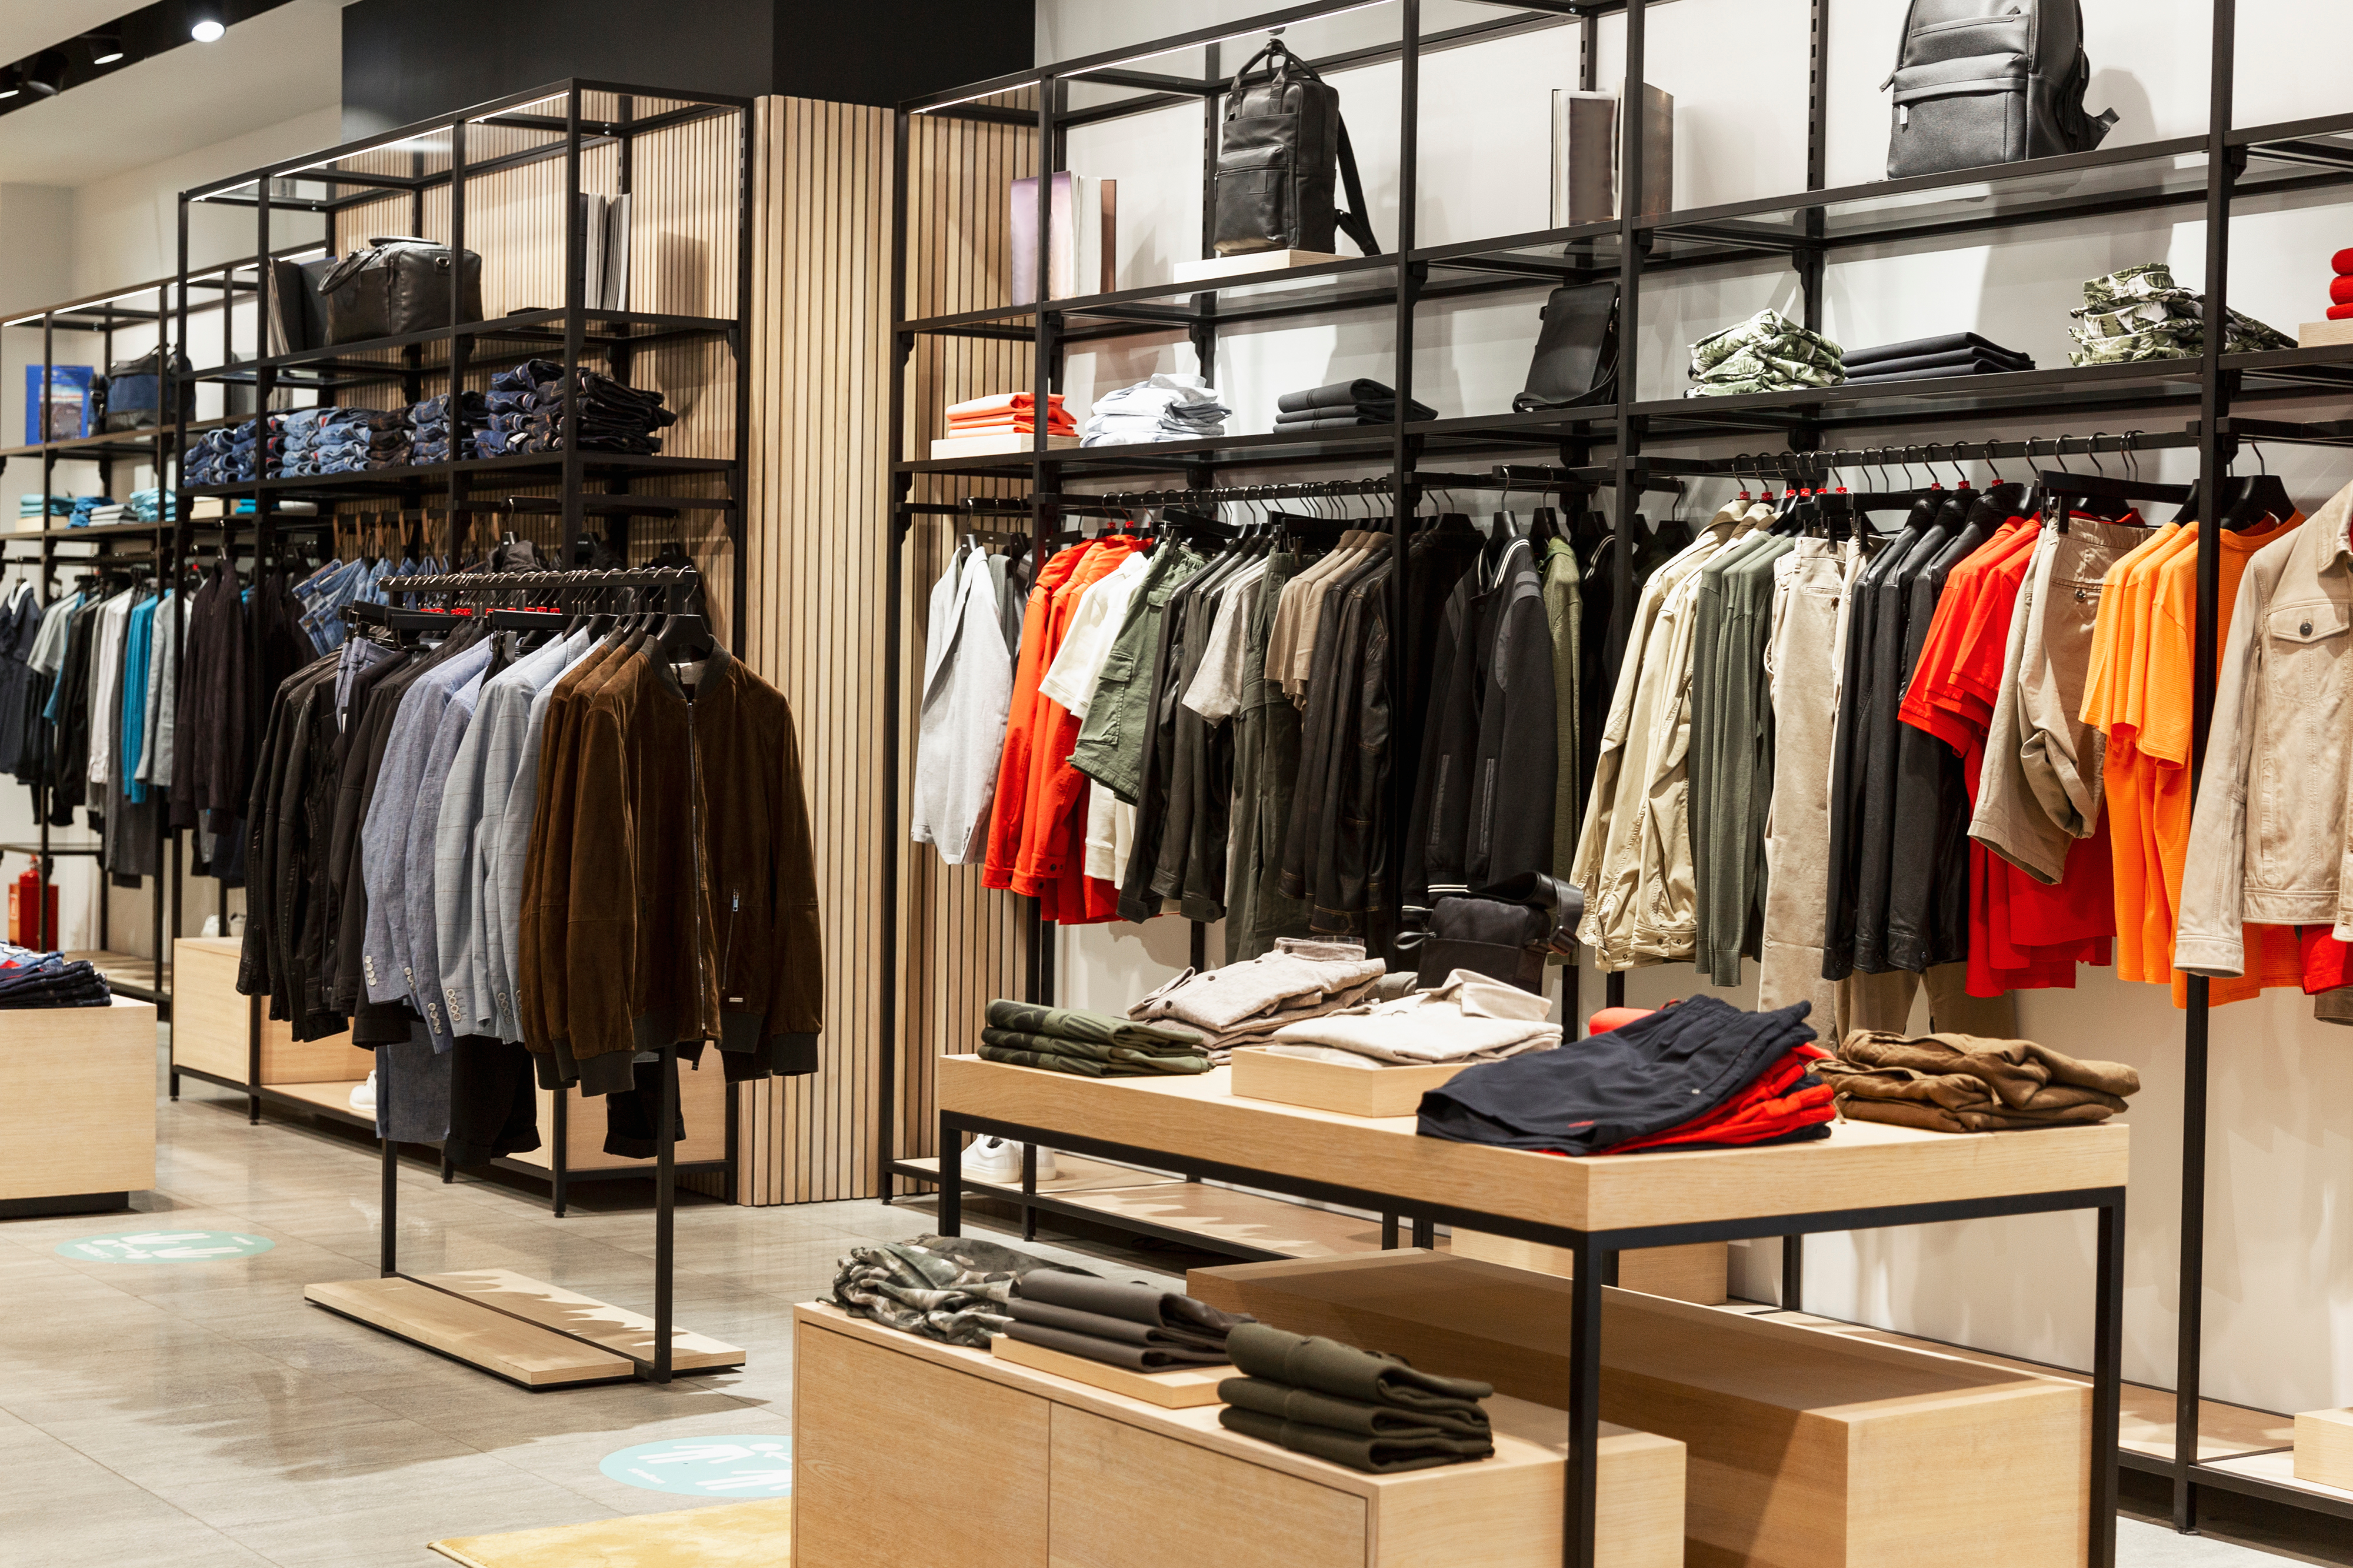 Interior of a men's clothing store. | Source: Shutterstock